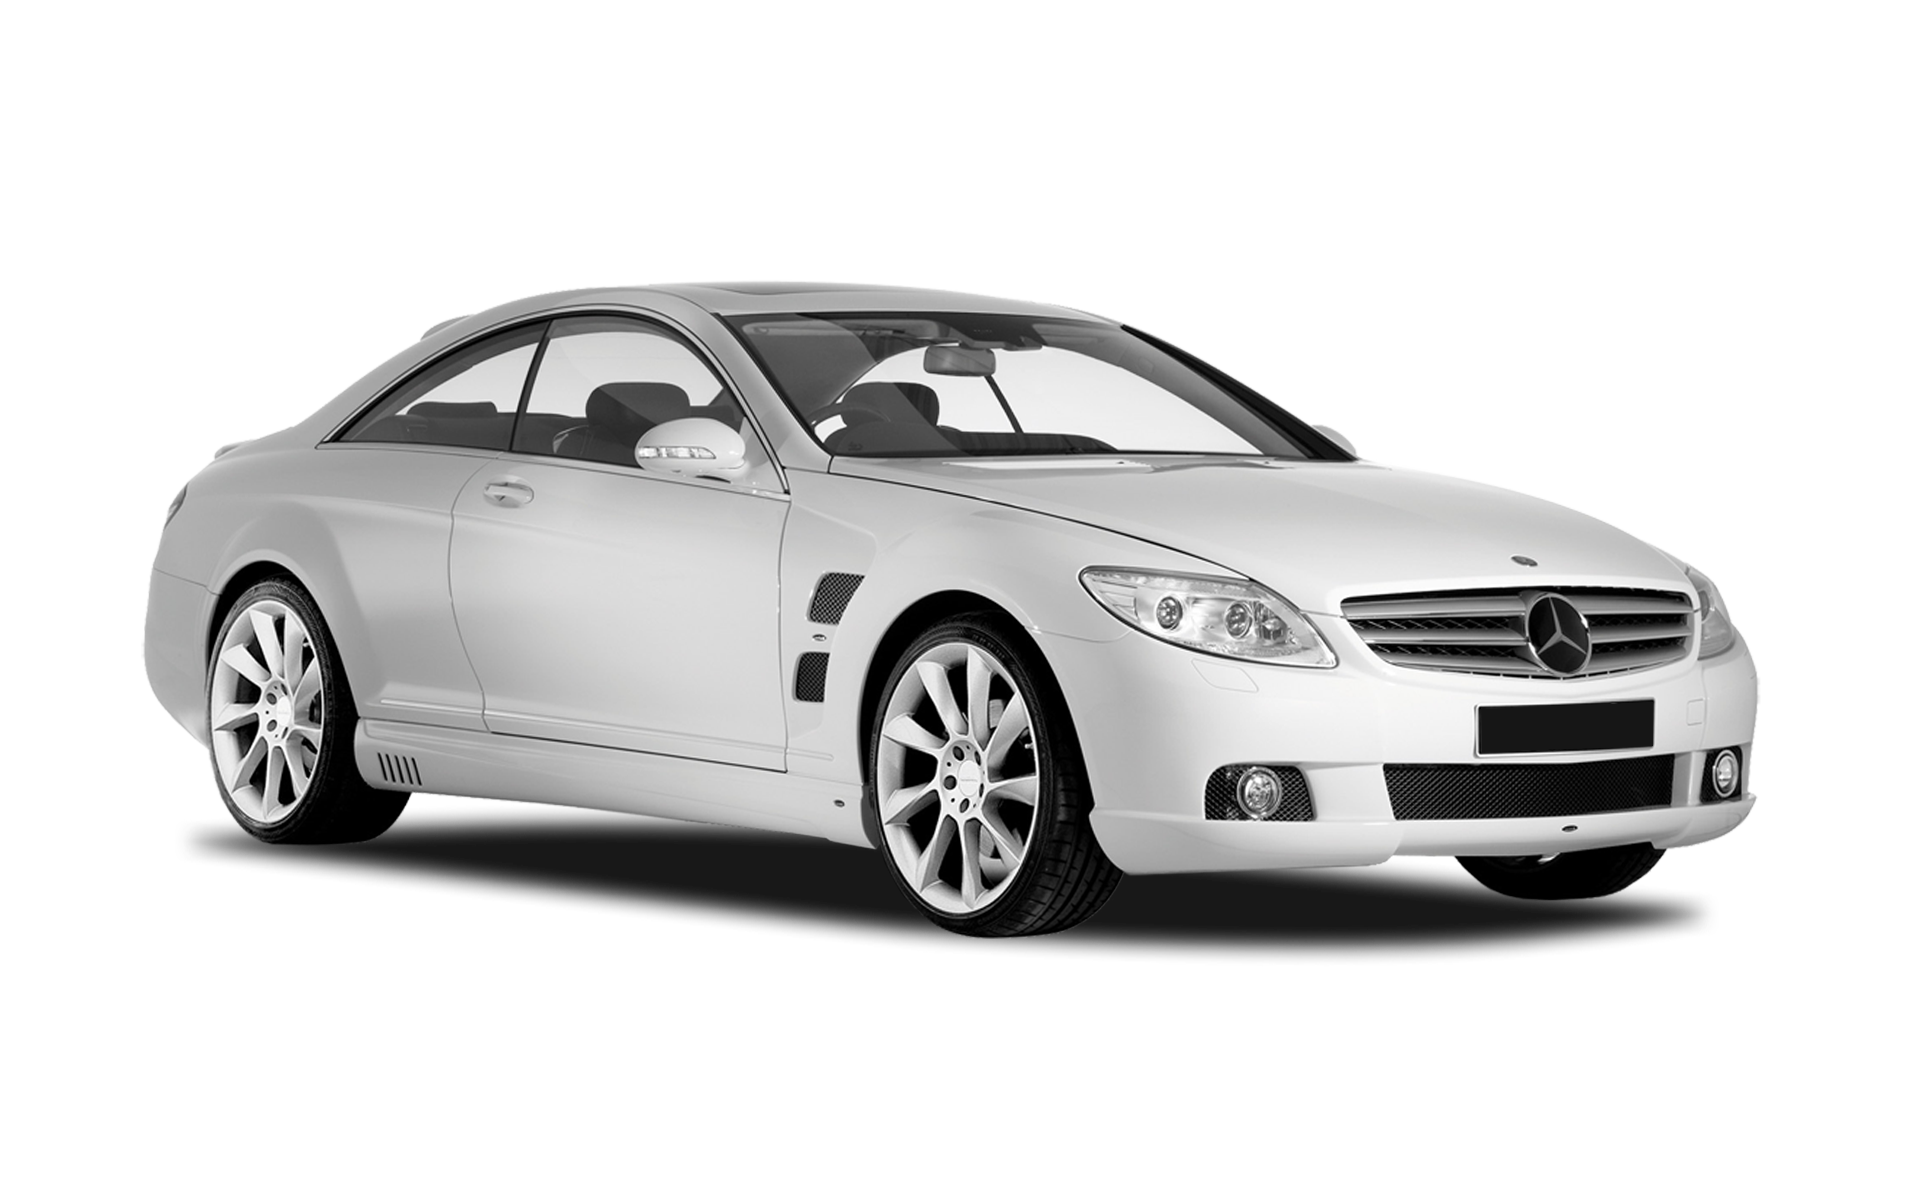 Mercedes CL Class (AMG) Alloy Wheels and Tyre Packages.